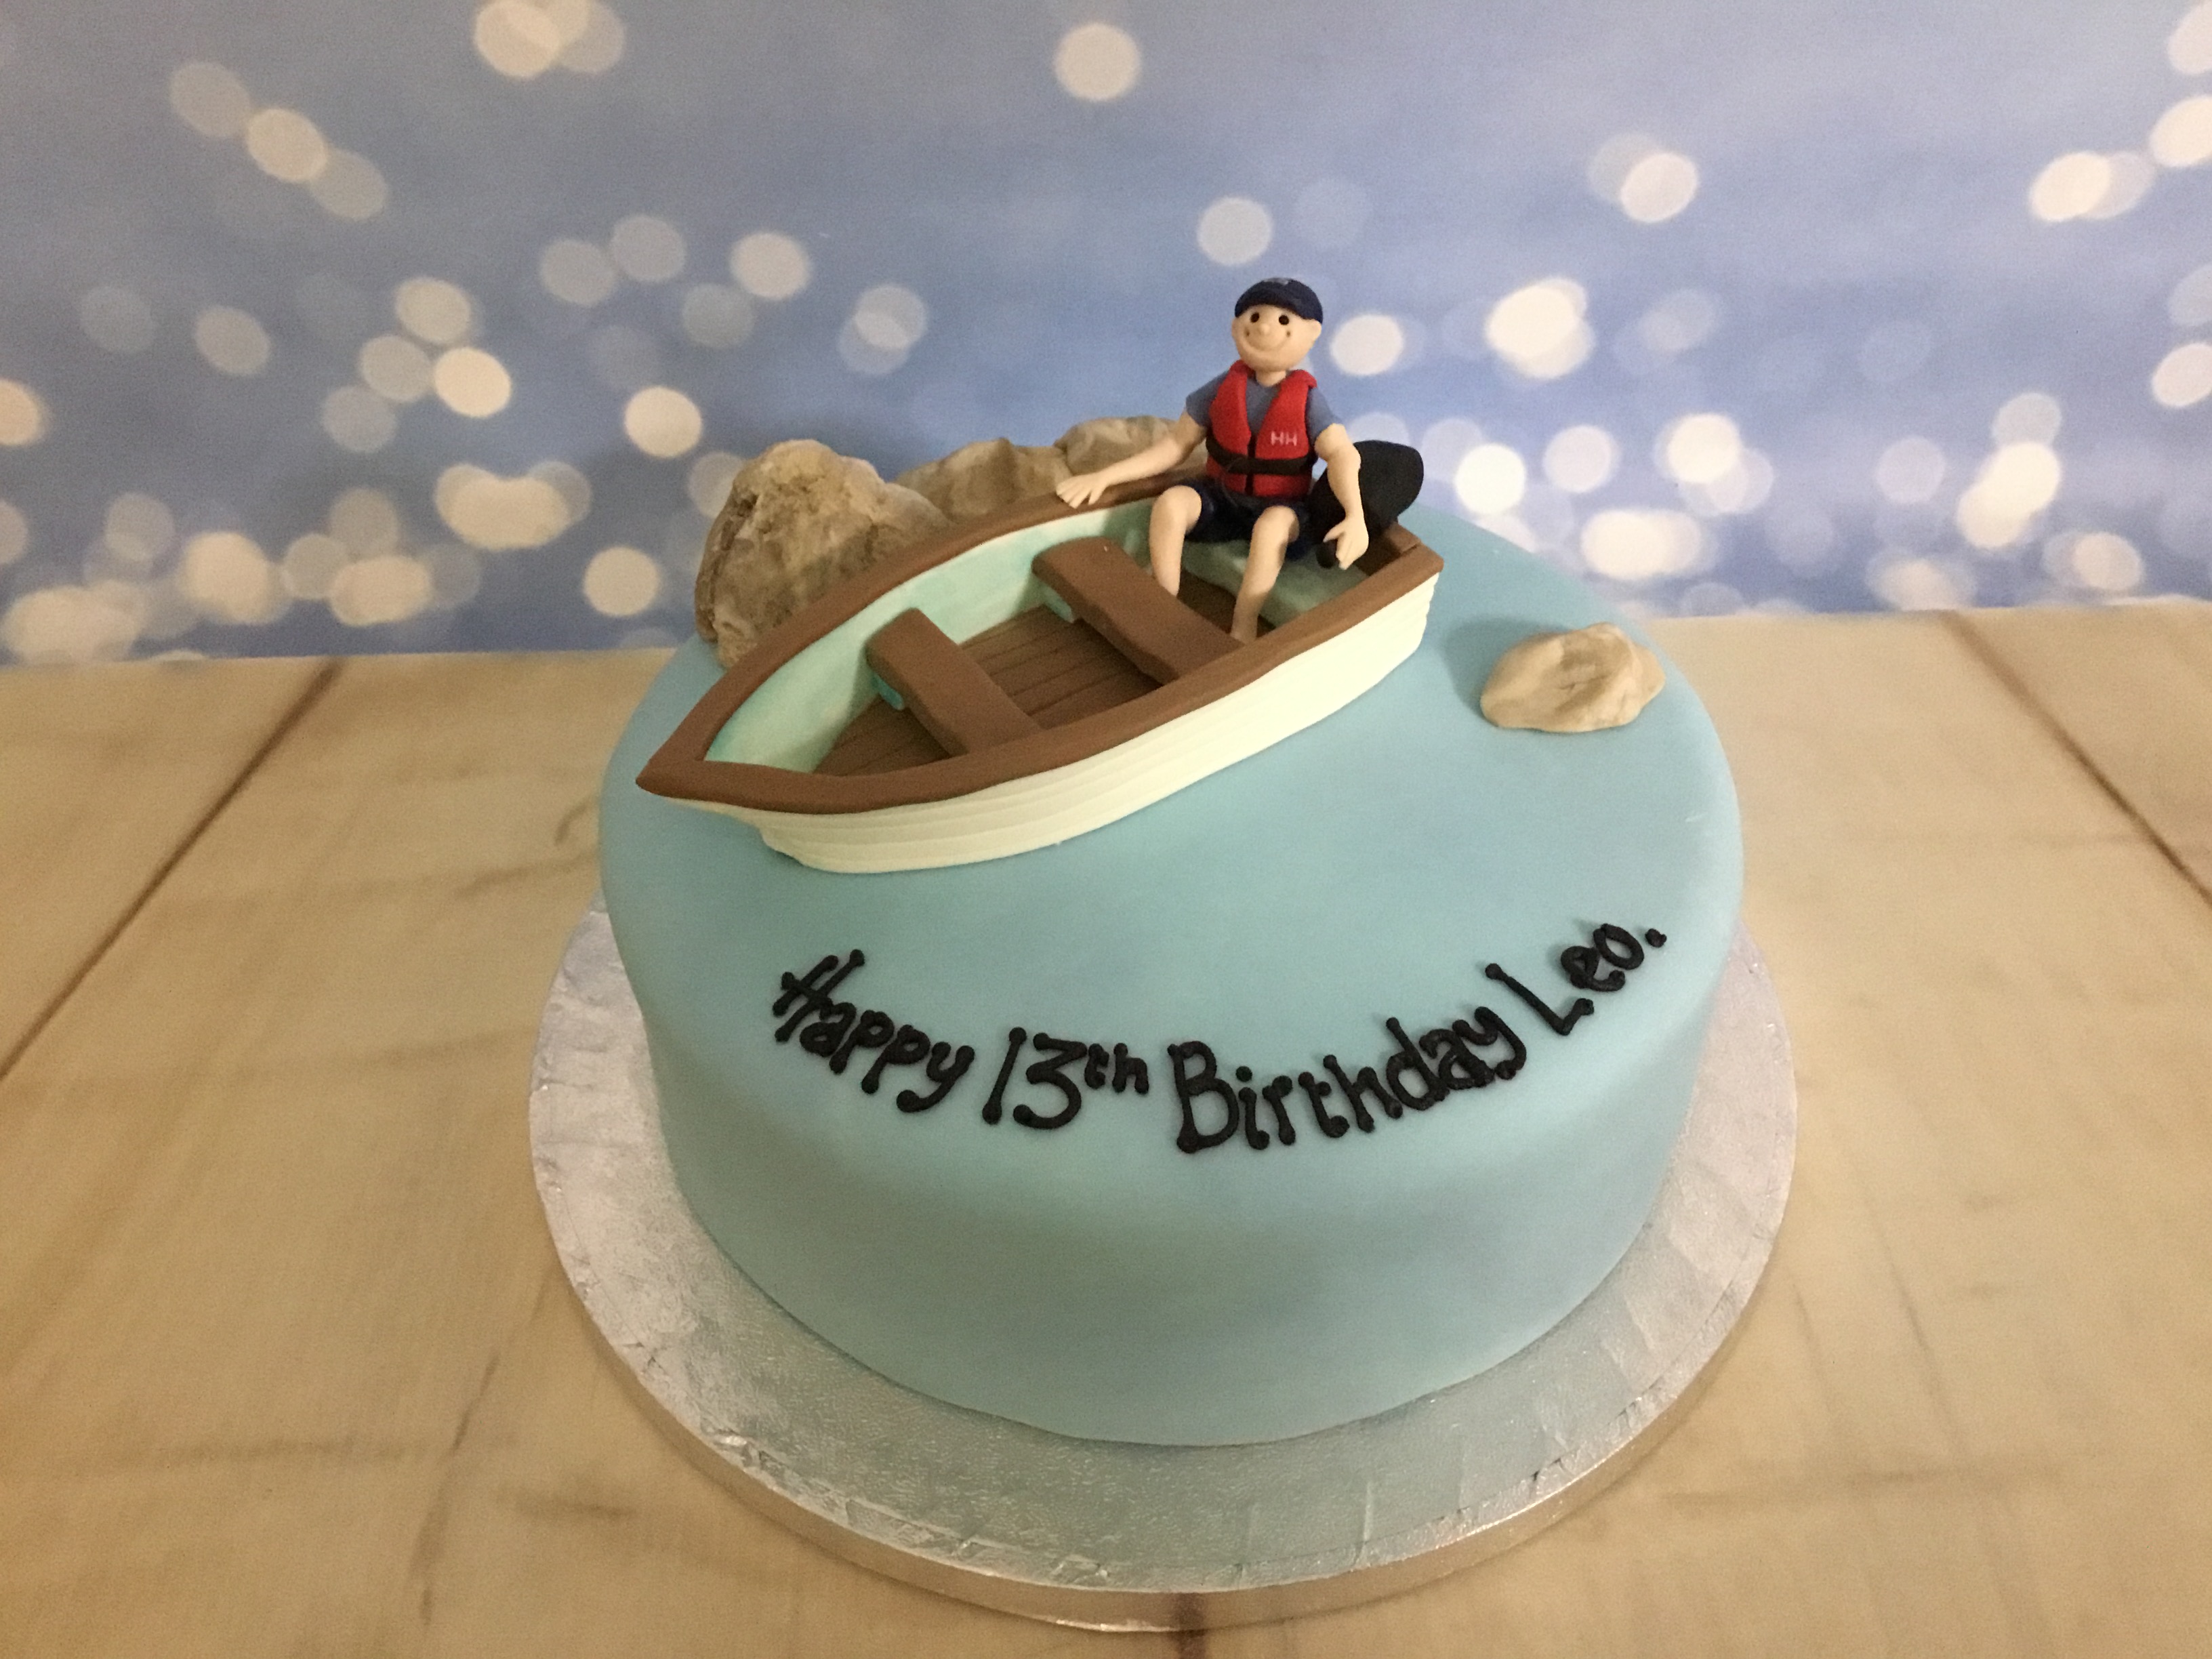 Details more than 81 boat birthday cake super hot - awesomeenglish.edu.vn